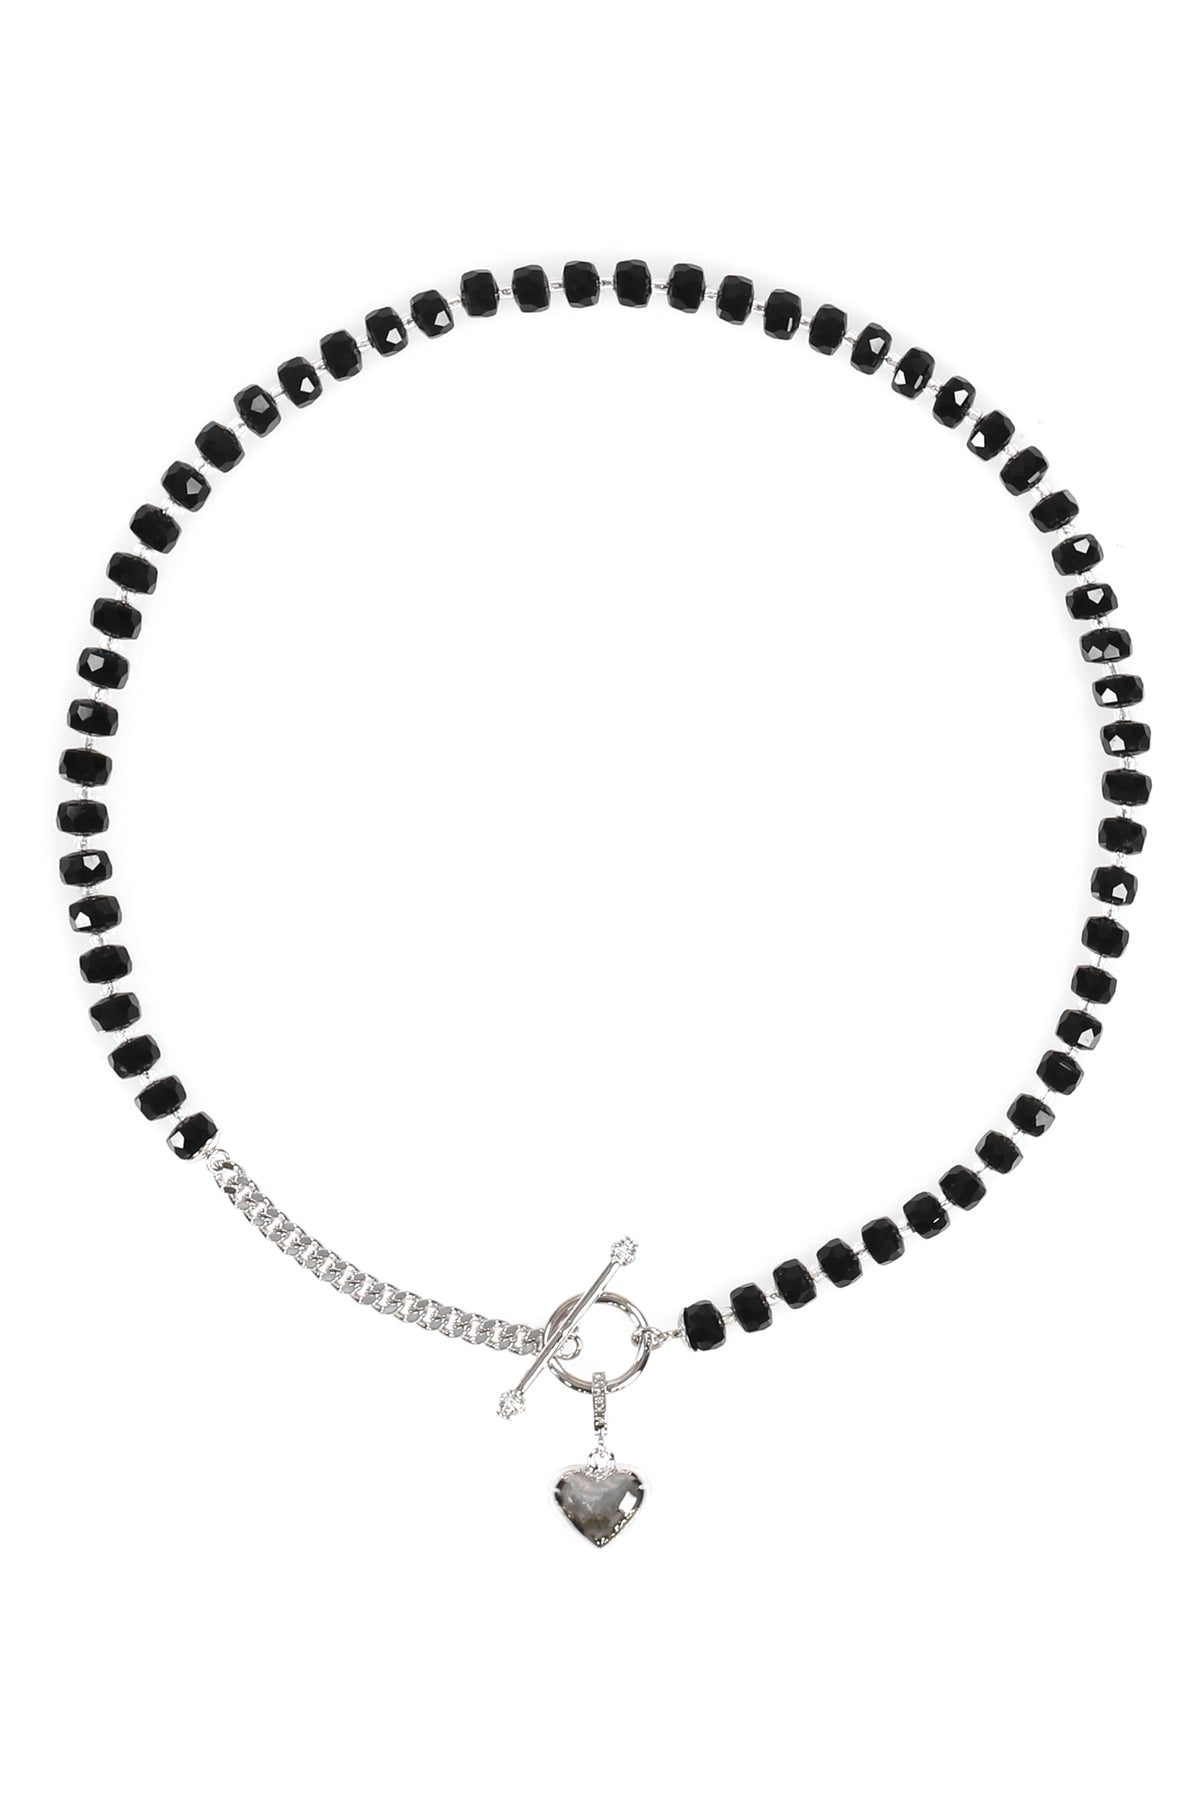 CRYSTAL CHAIN 001 / BLK SIL